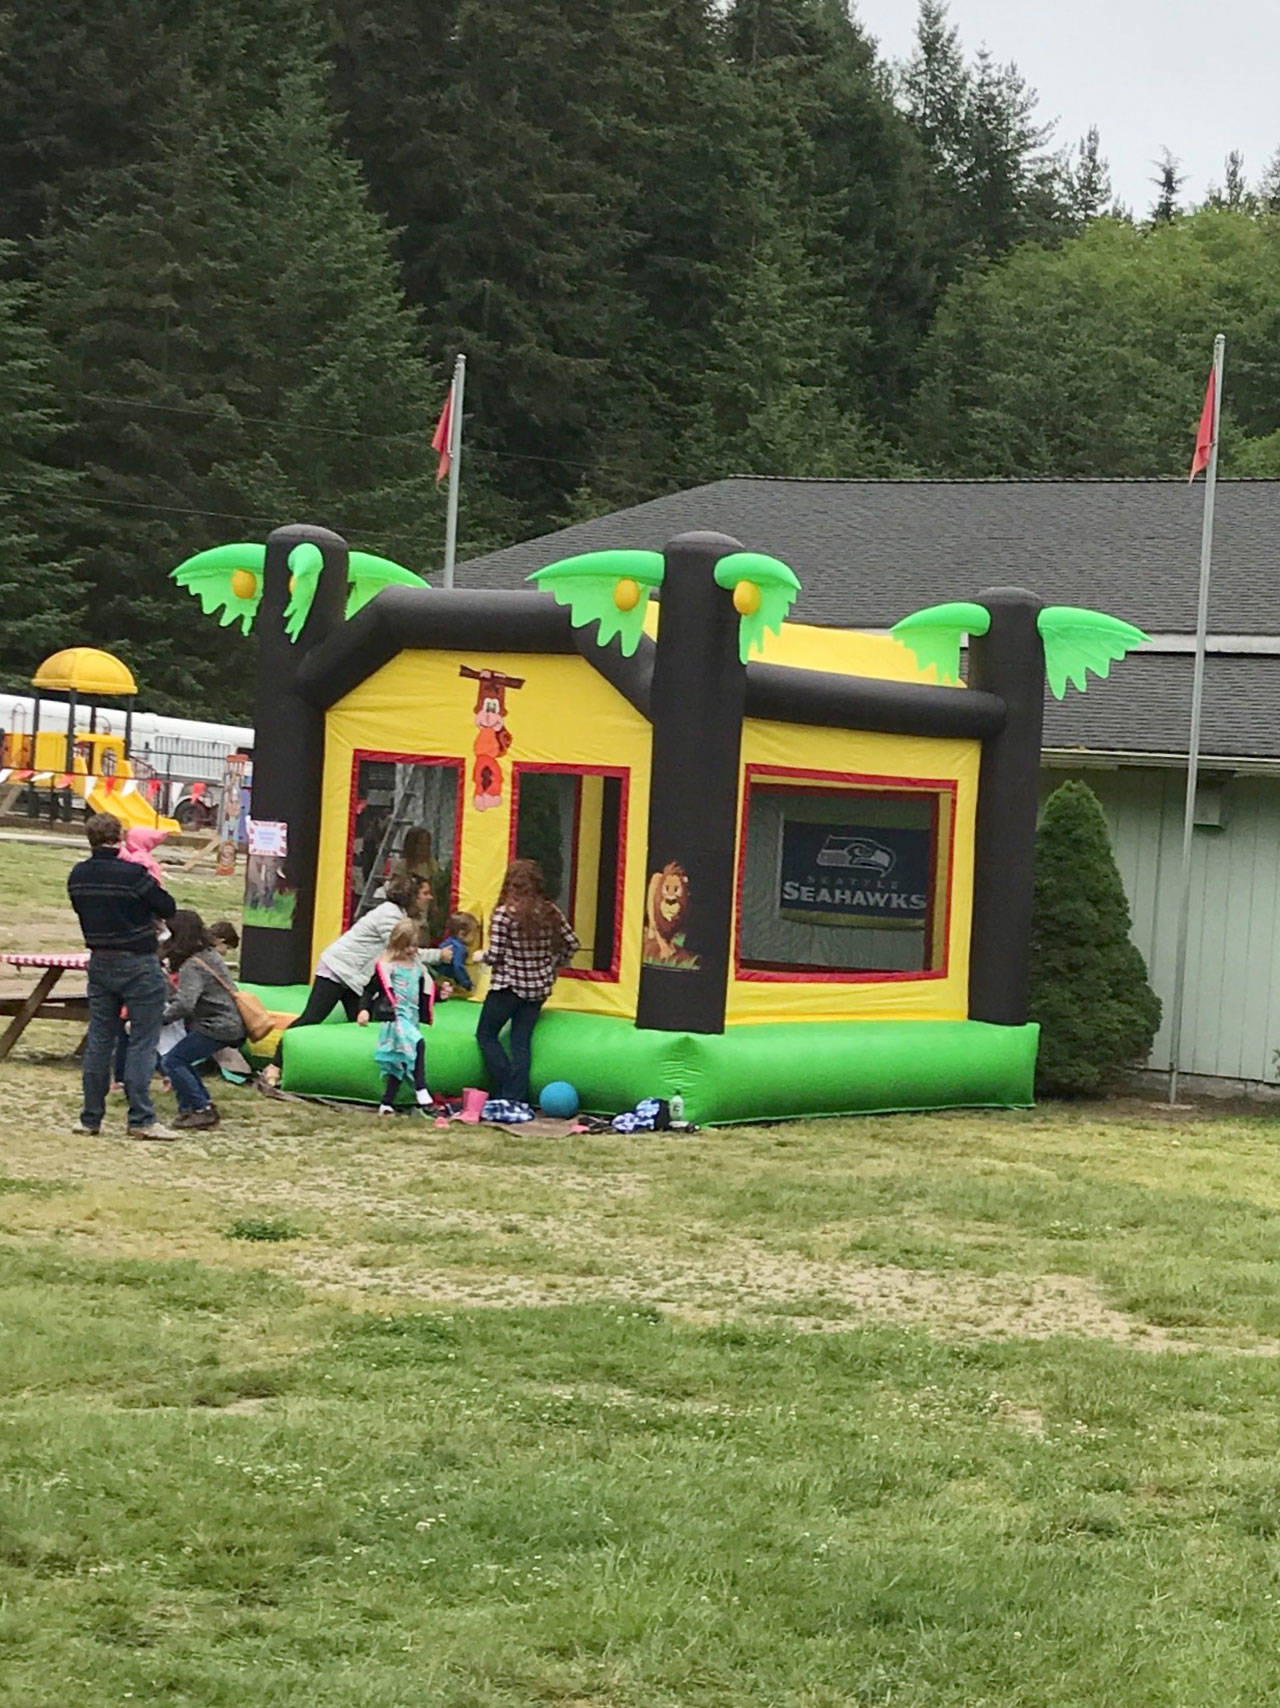 Contributed photo — A bouncy house was stolen from Wellington Day School’s property last week. It was found on Monday by South Whidbey Parks and Recreation District Groundskeeper Tom Fallon near Trustland Trails.